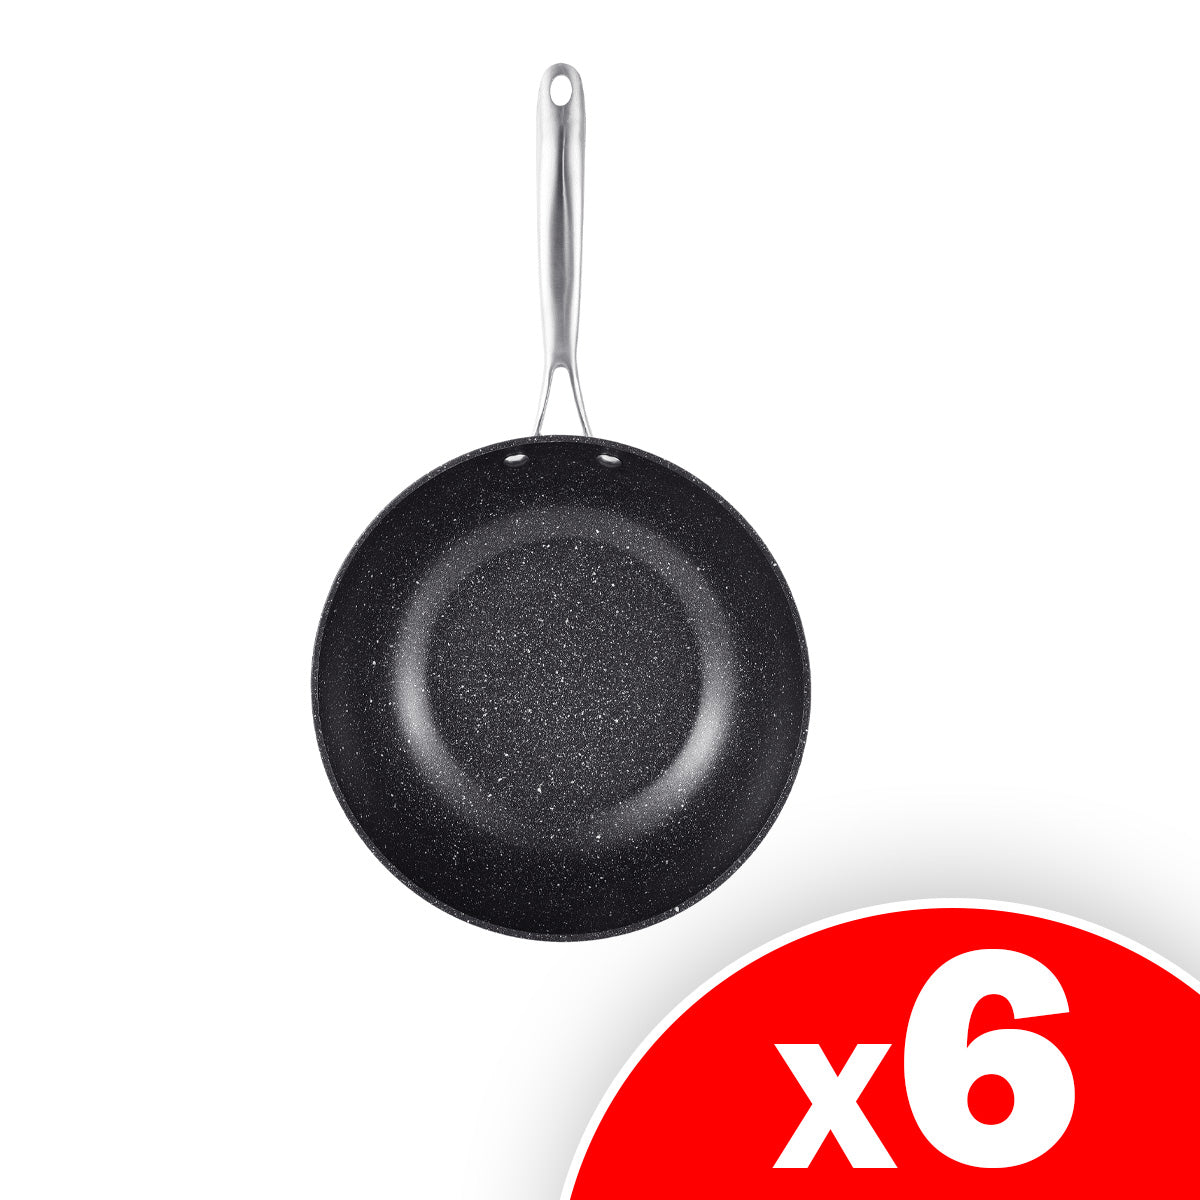 Diamond Infused Ceramic/Marble Coat 10" Scratch Resistant Frying Pan, 6 Pack